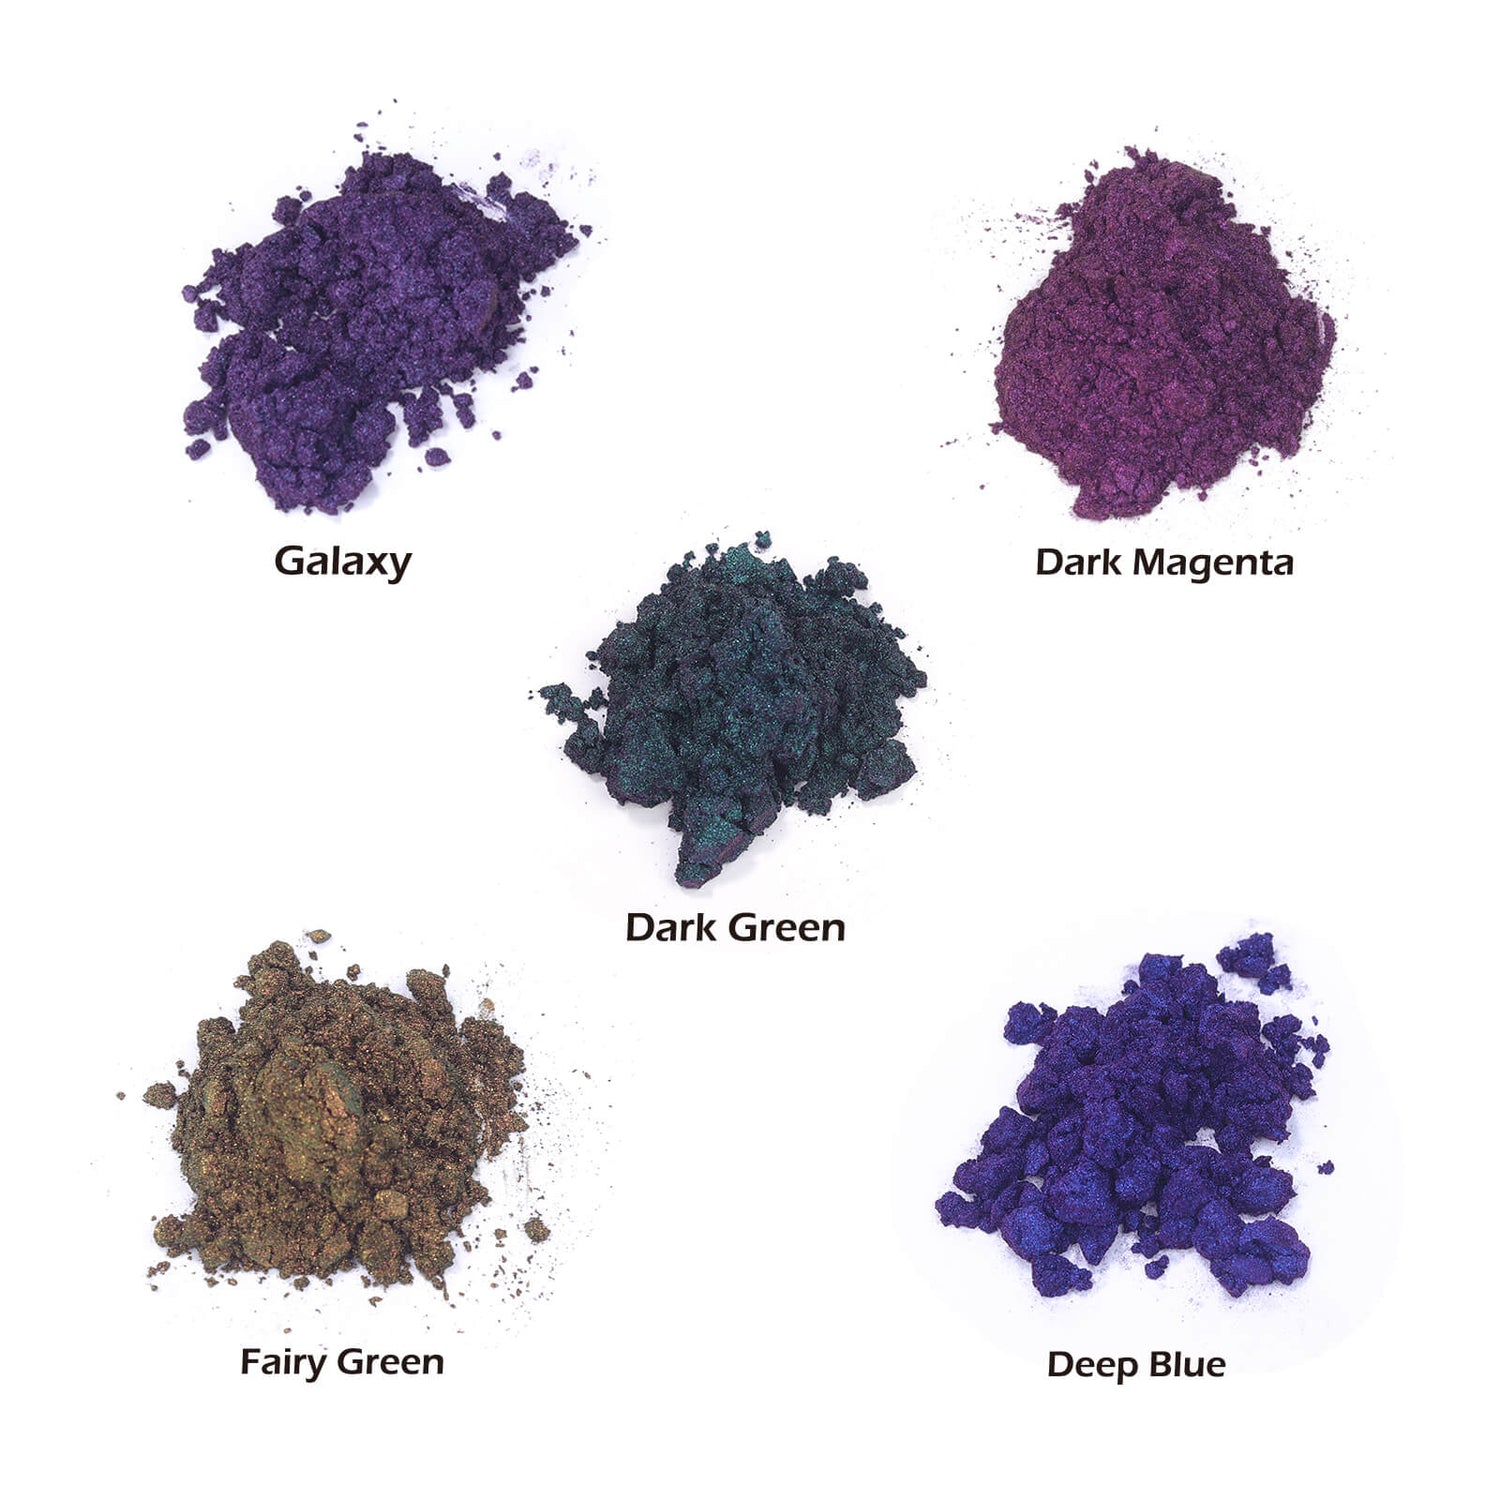 Let's Resin Chameleon Chunky Flakes, Resin Supplies-8 Color Intense ColorSHIFT Pigment Powder for Resin Crafts/Tumblers, Chrome Powder Iridescent Eyes